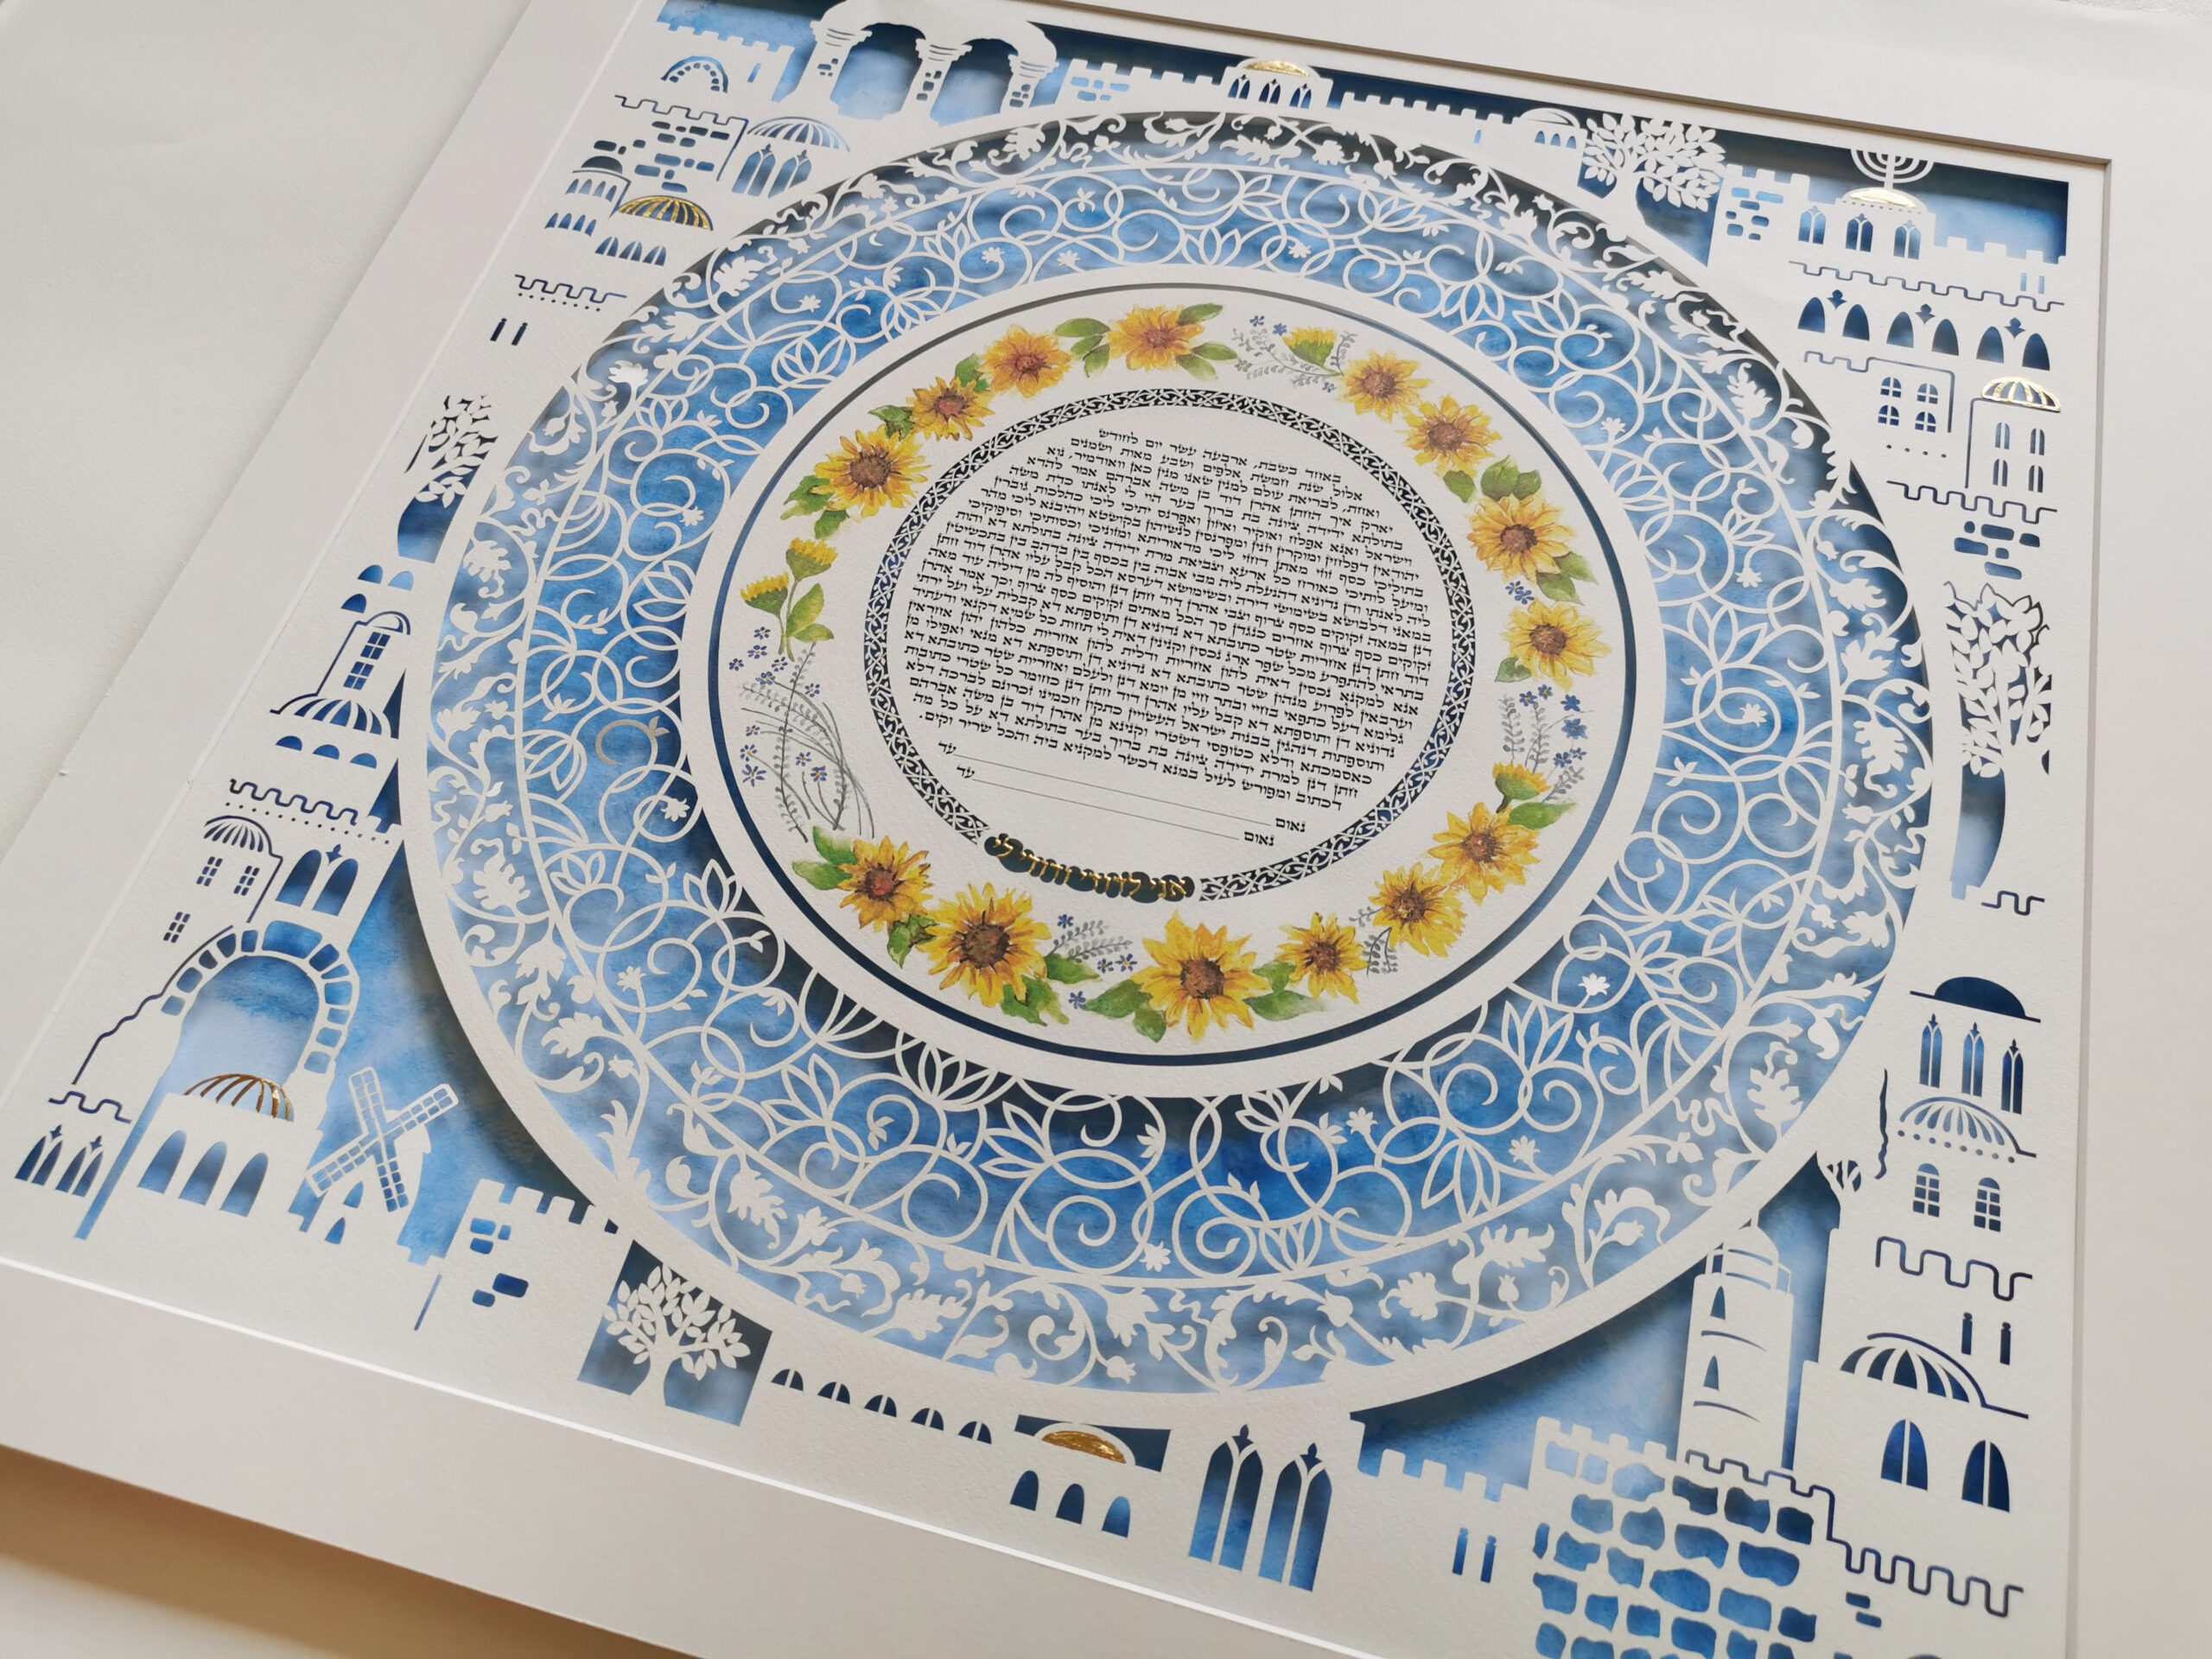 3. A modern Ketubah design featuring abstract imagery and vibrant colors